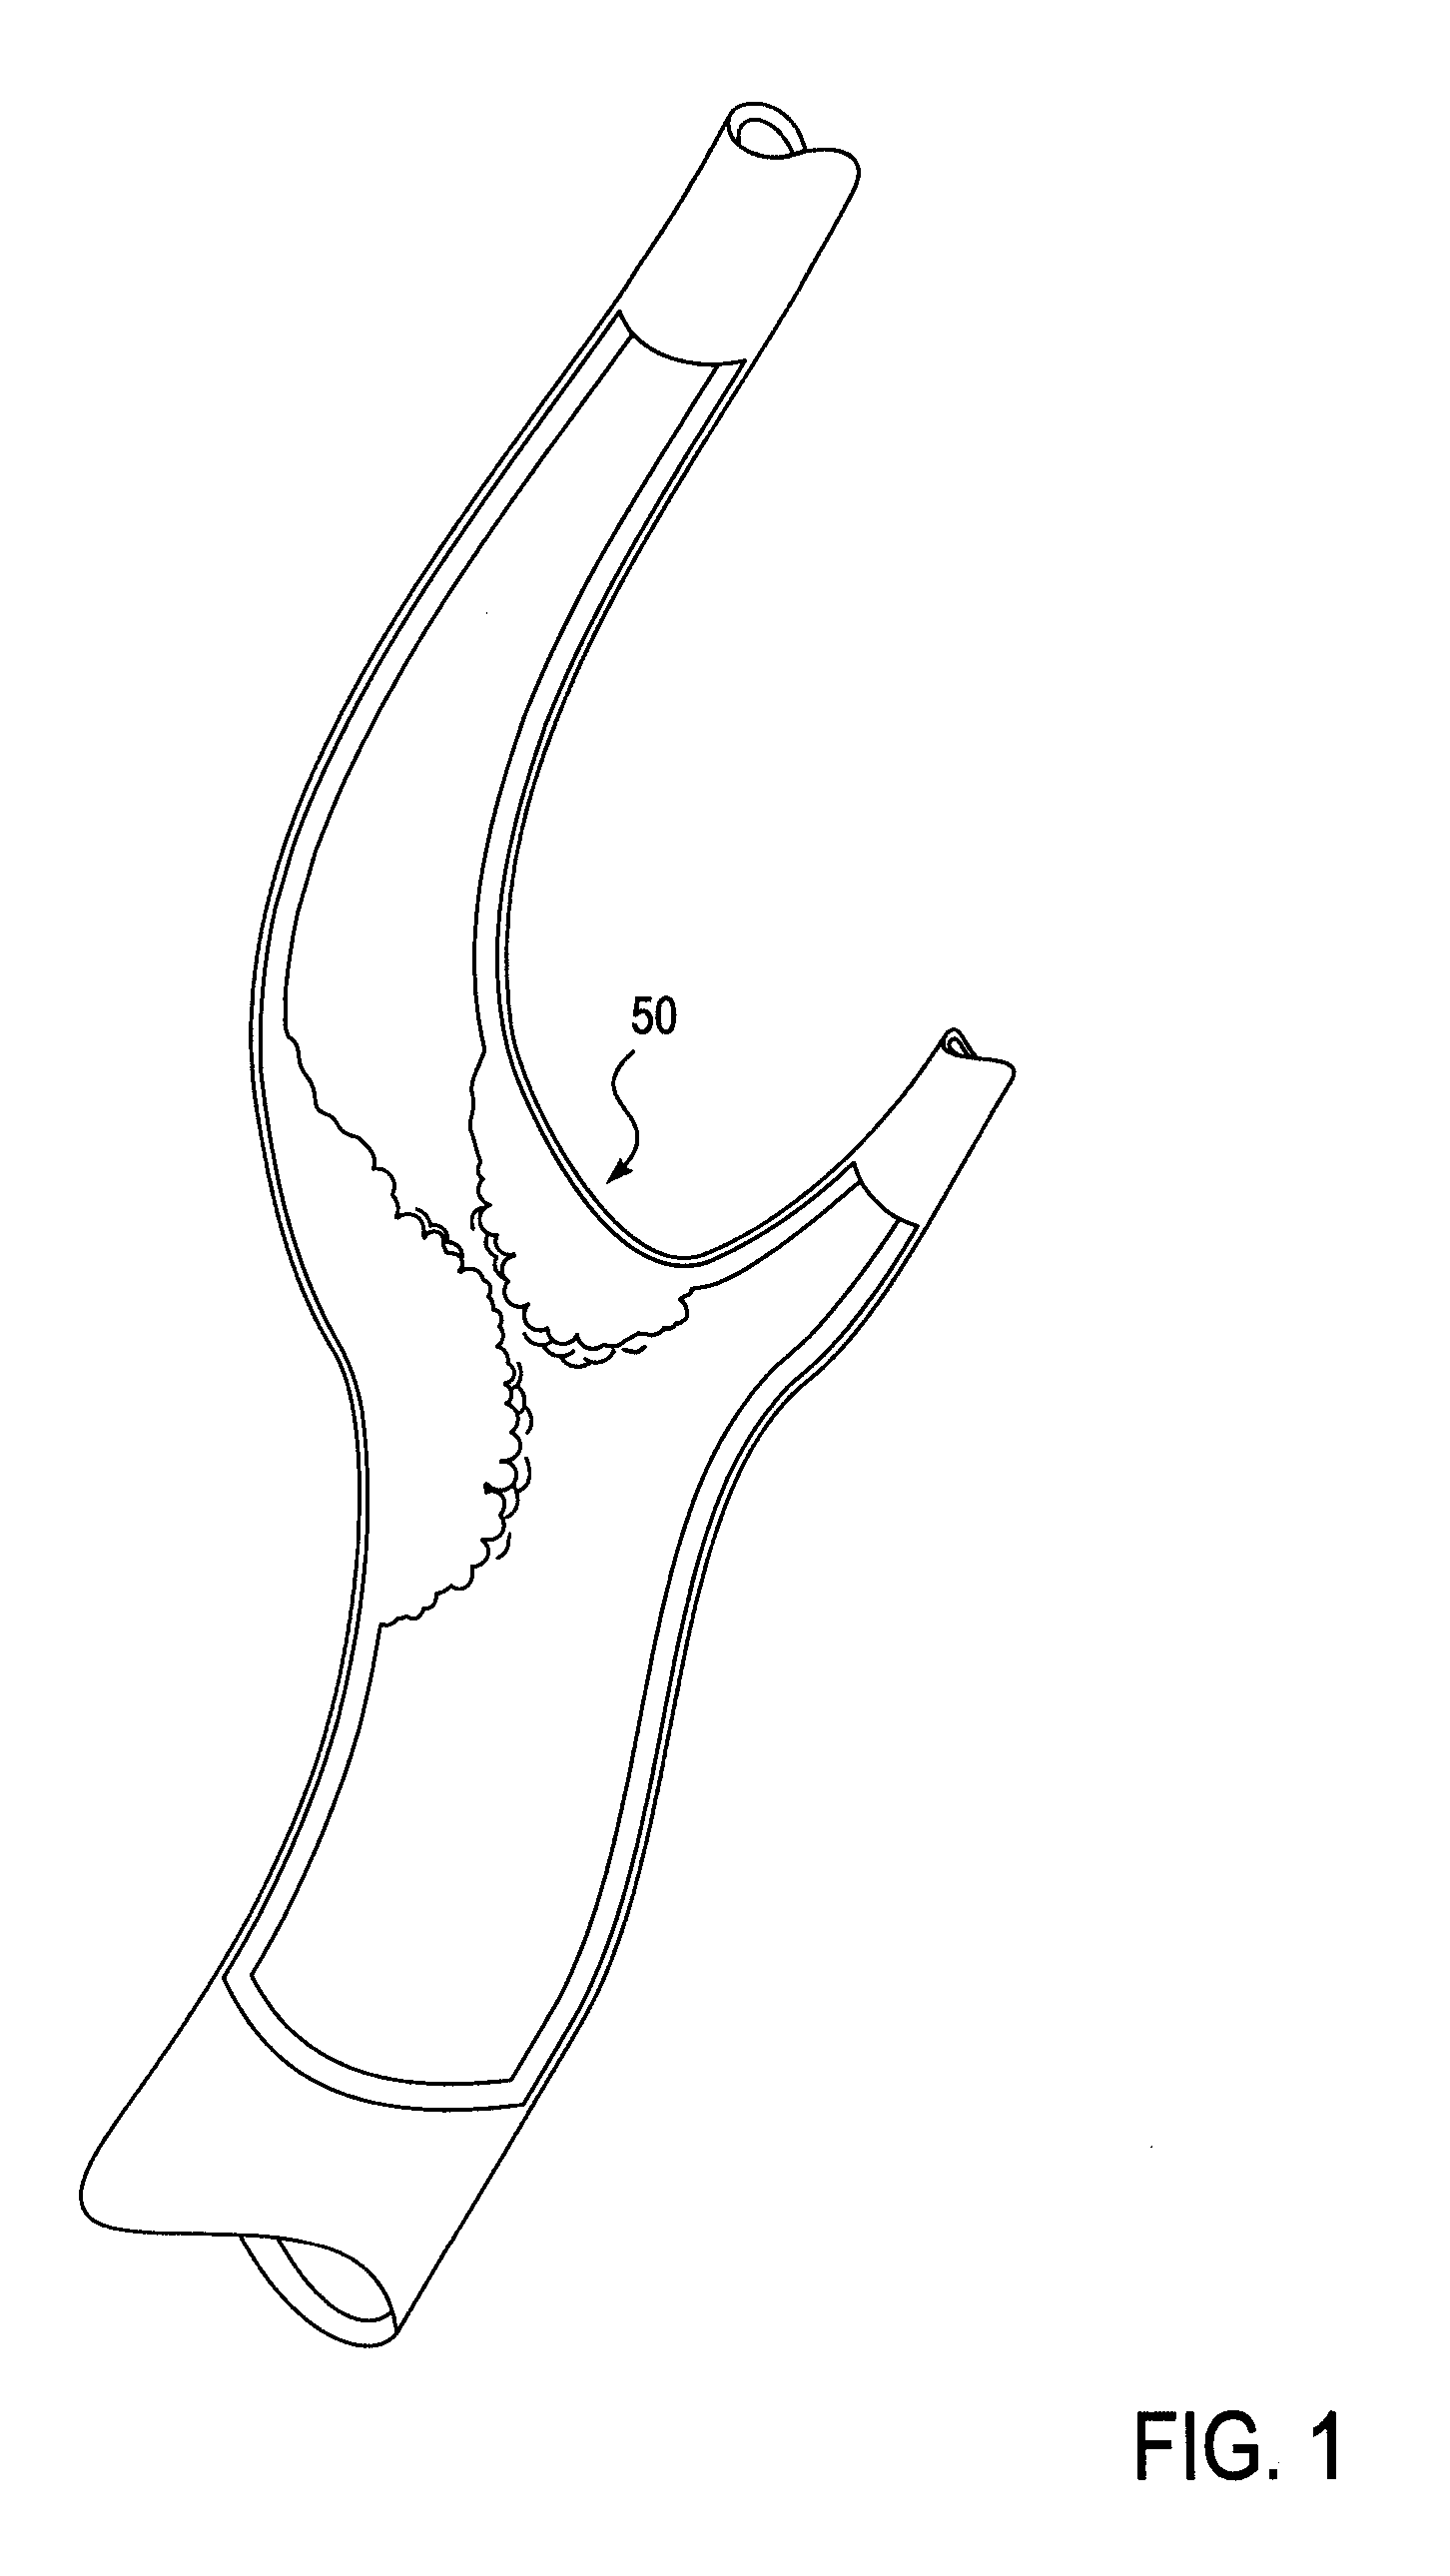 Catheter system for angioplasty and stenting with embolic protection